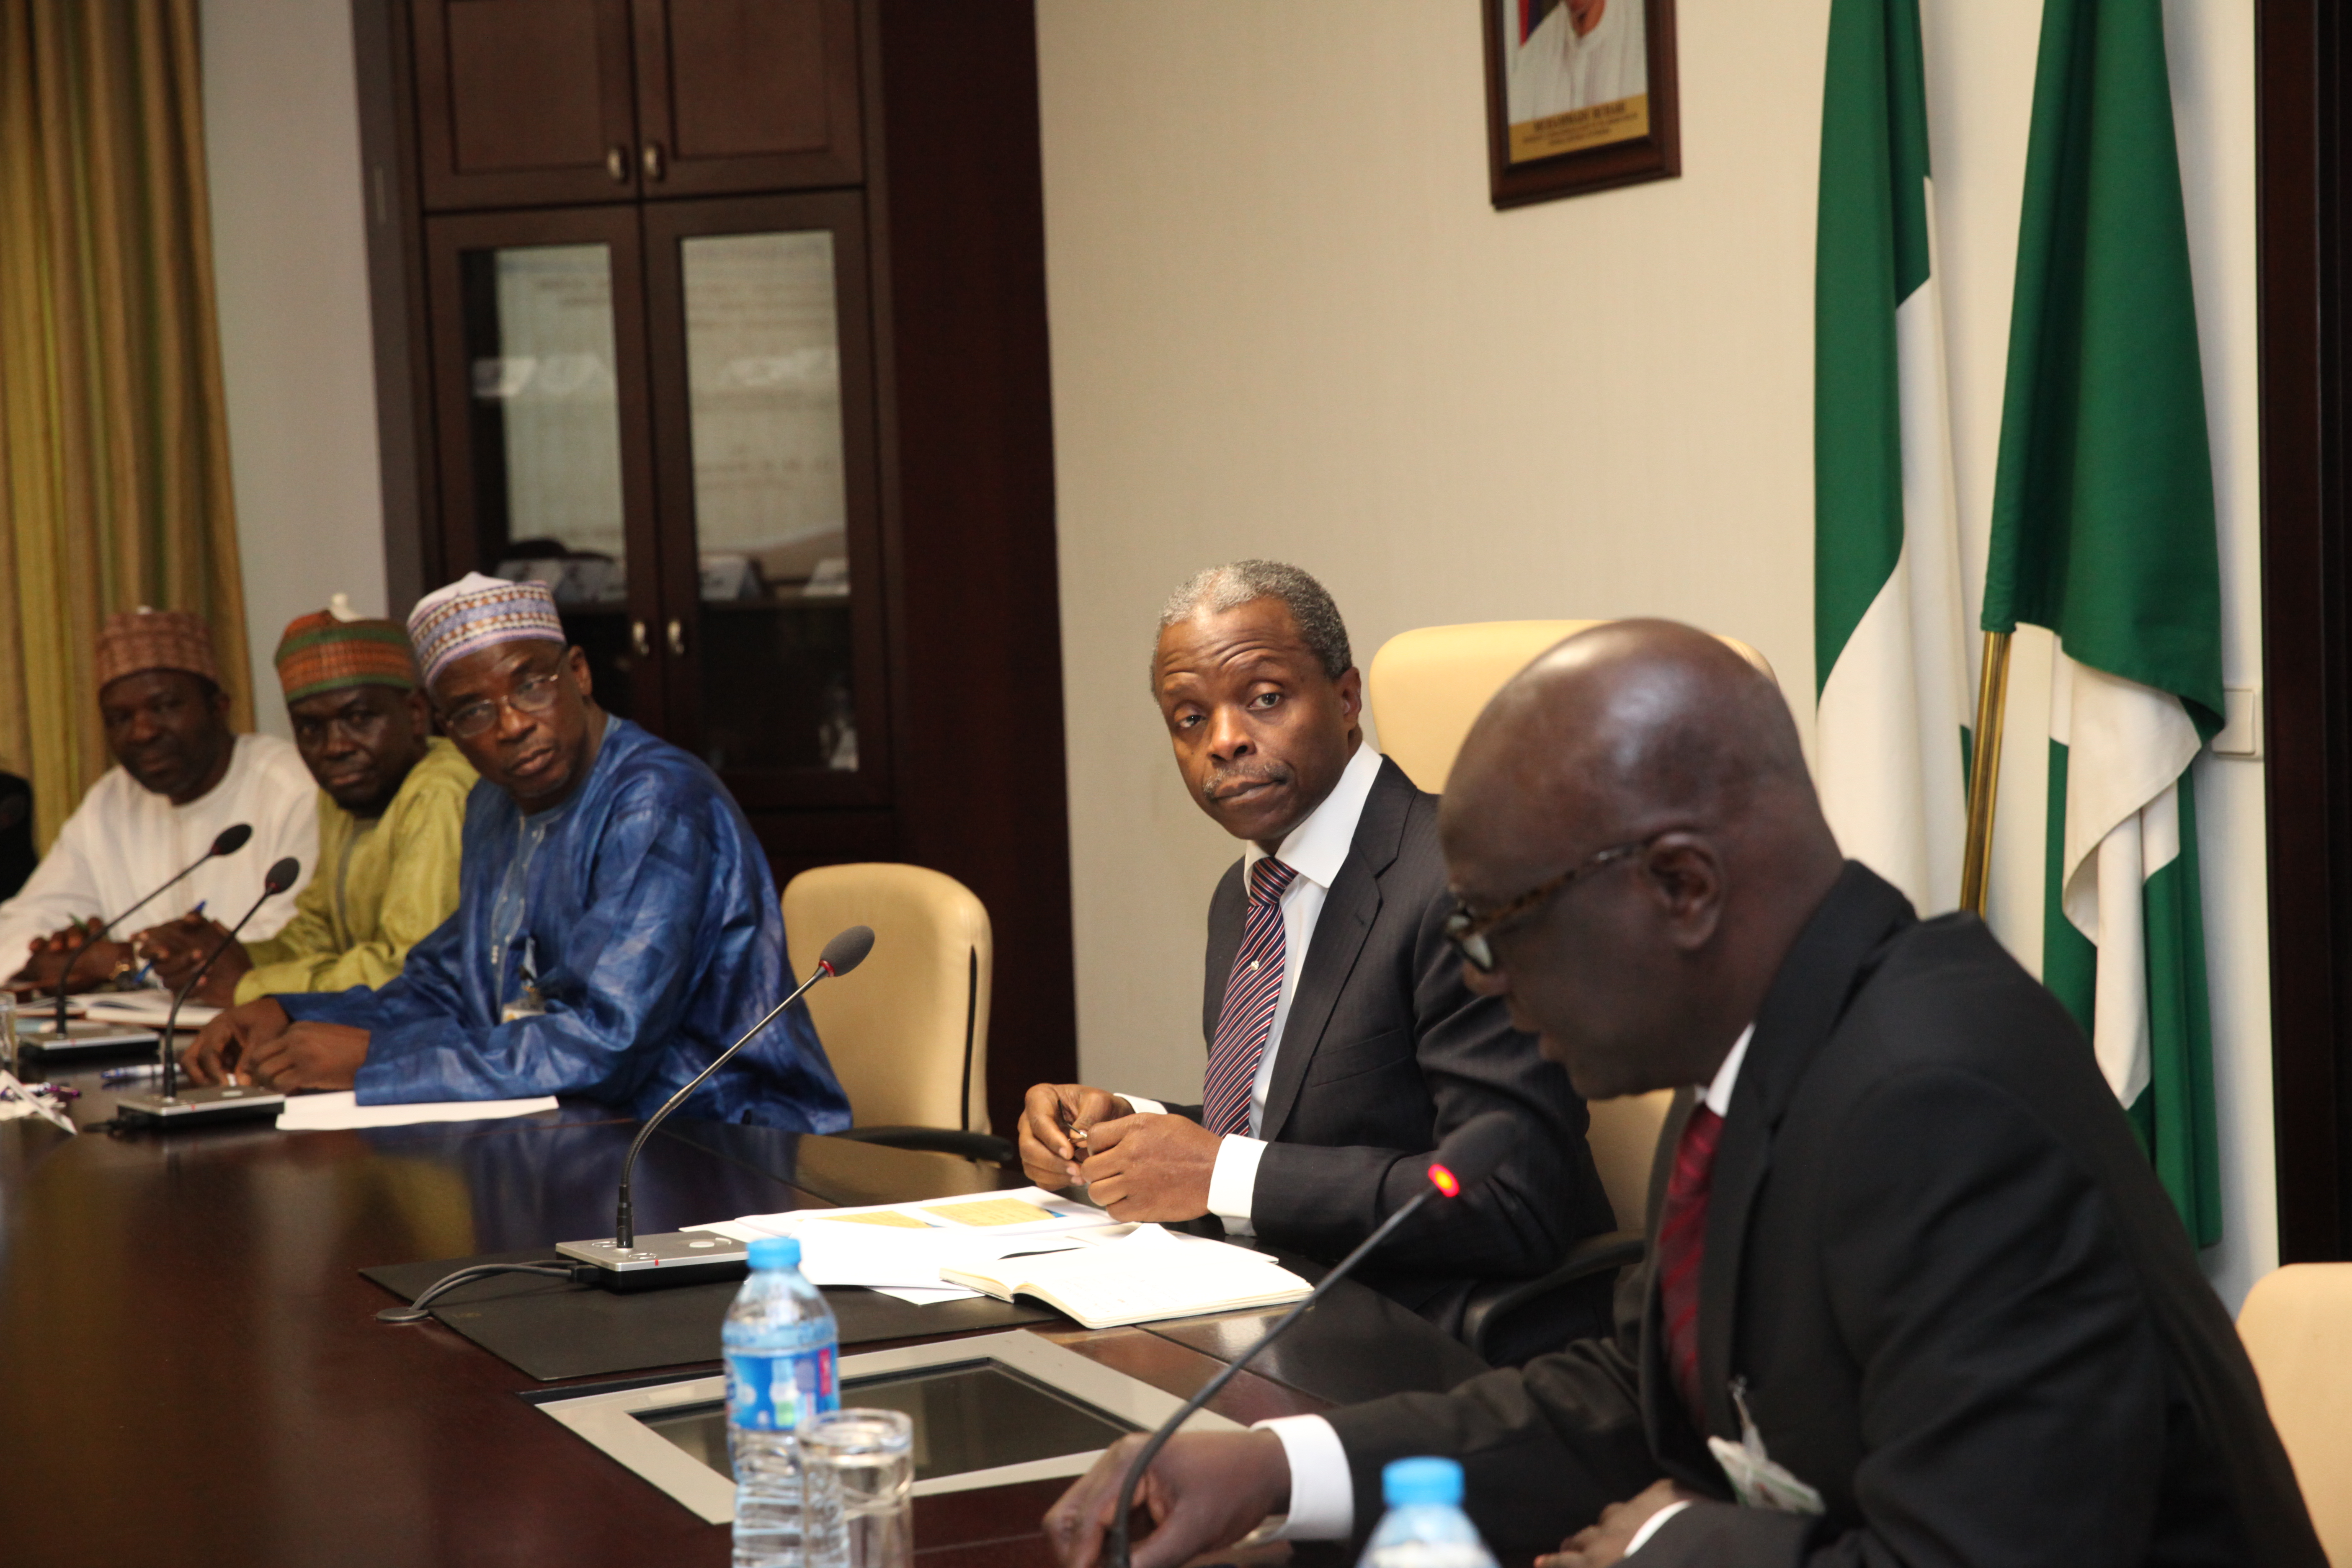 VP Osinbajo Meets With The Management Of The National Boundary Commission On 22/09/2015